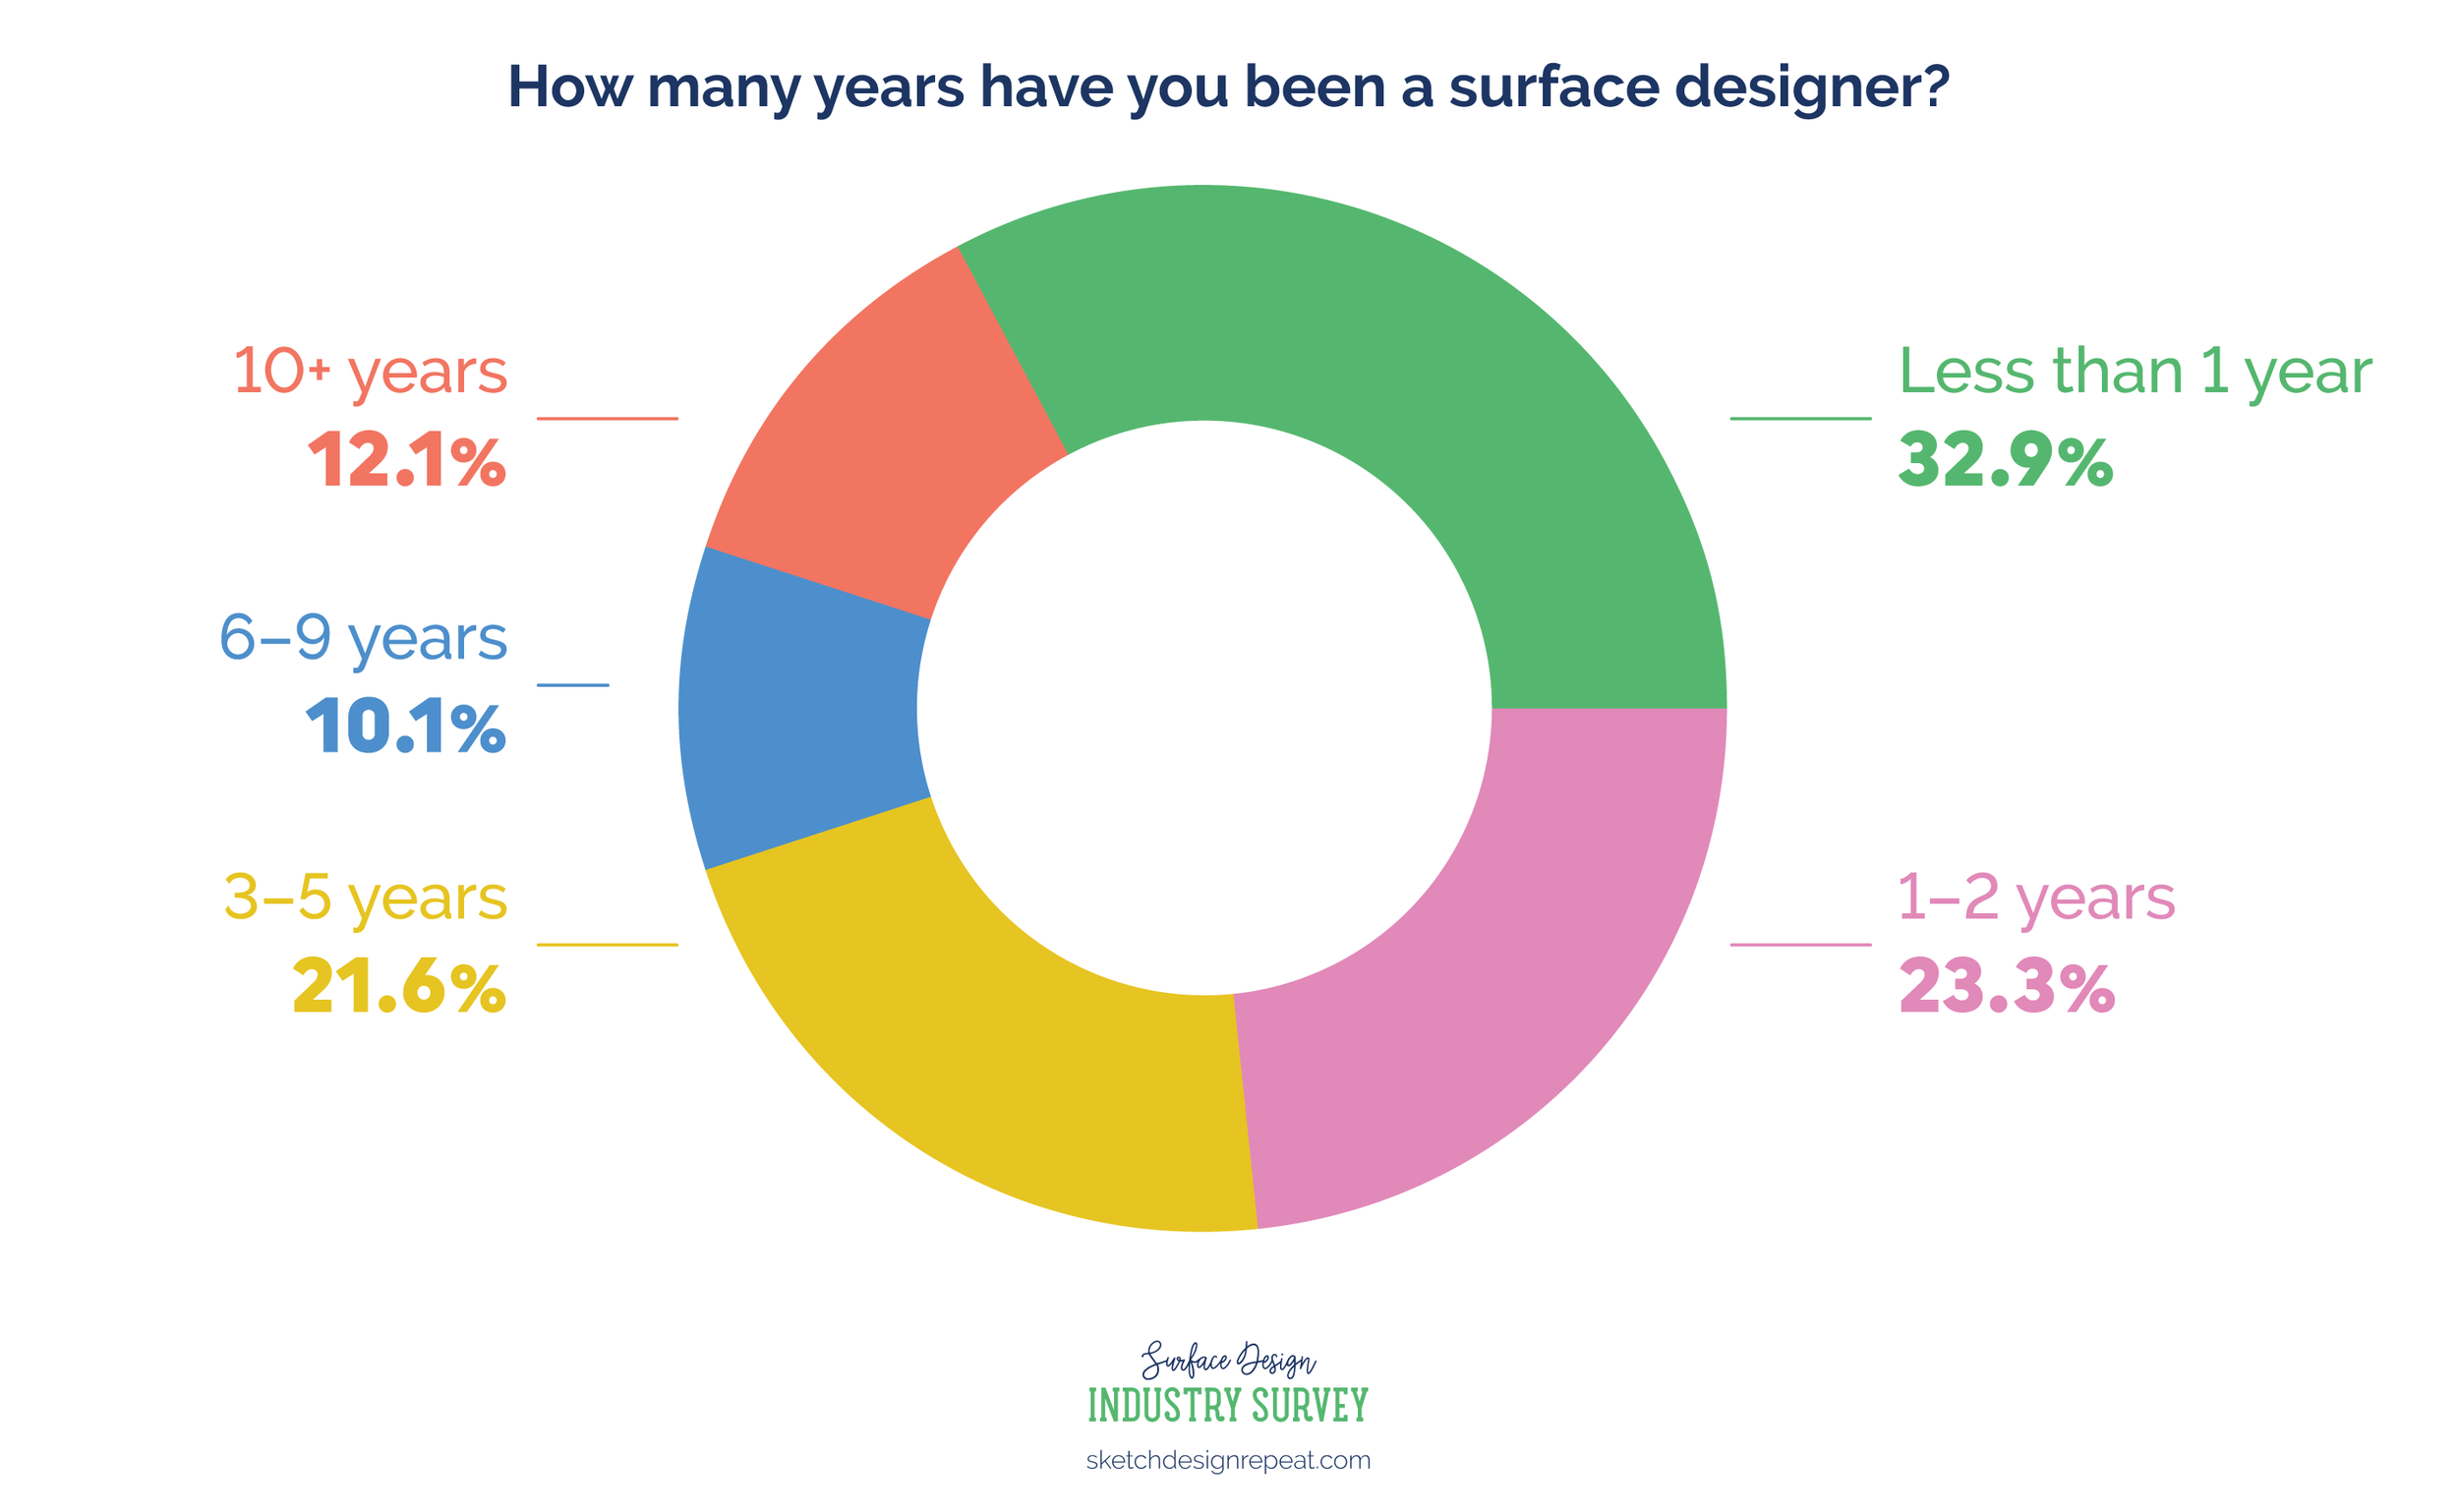 Surface Design Industry Survey 2020: career experience